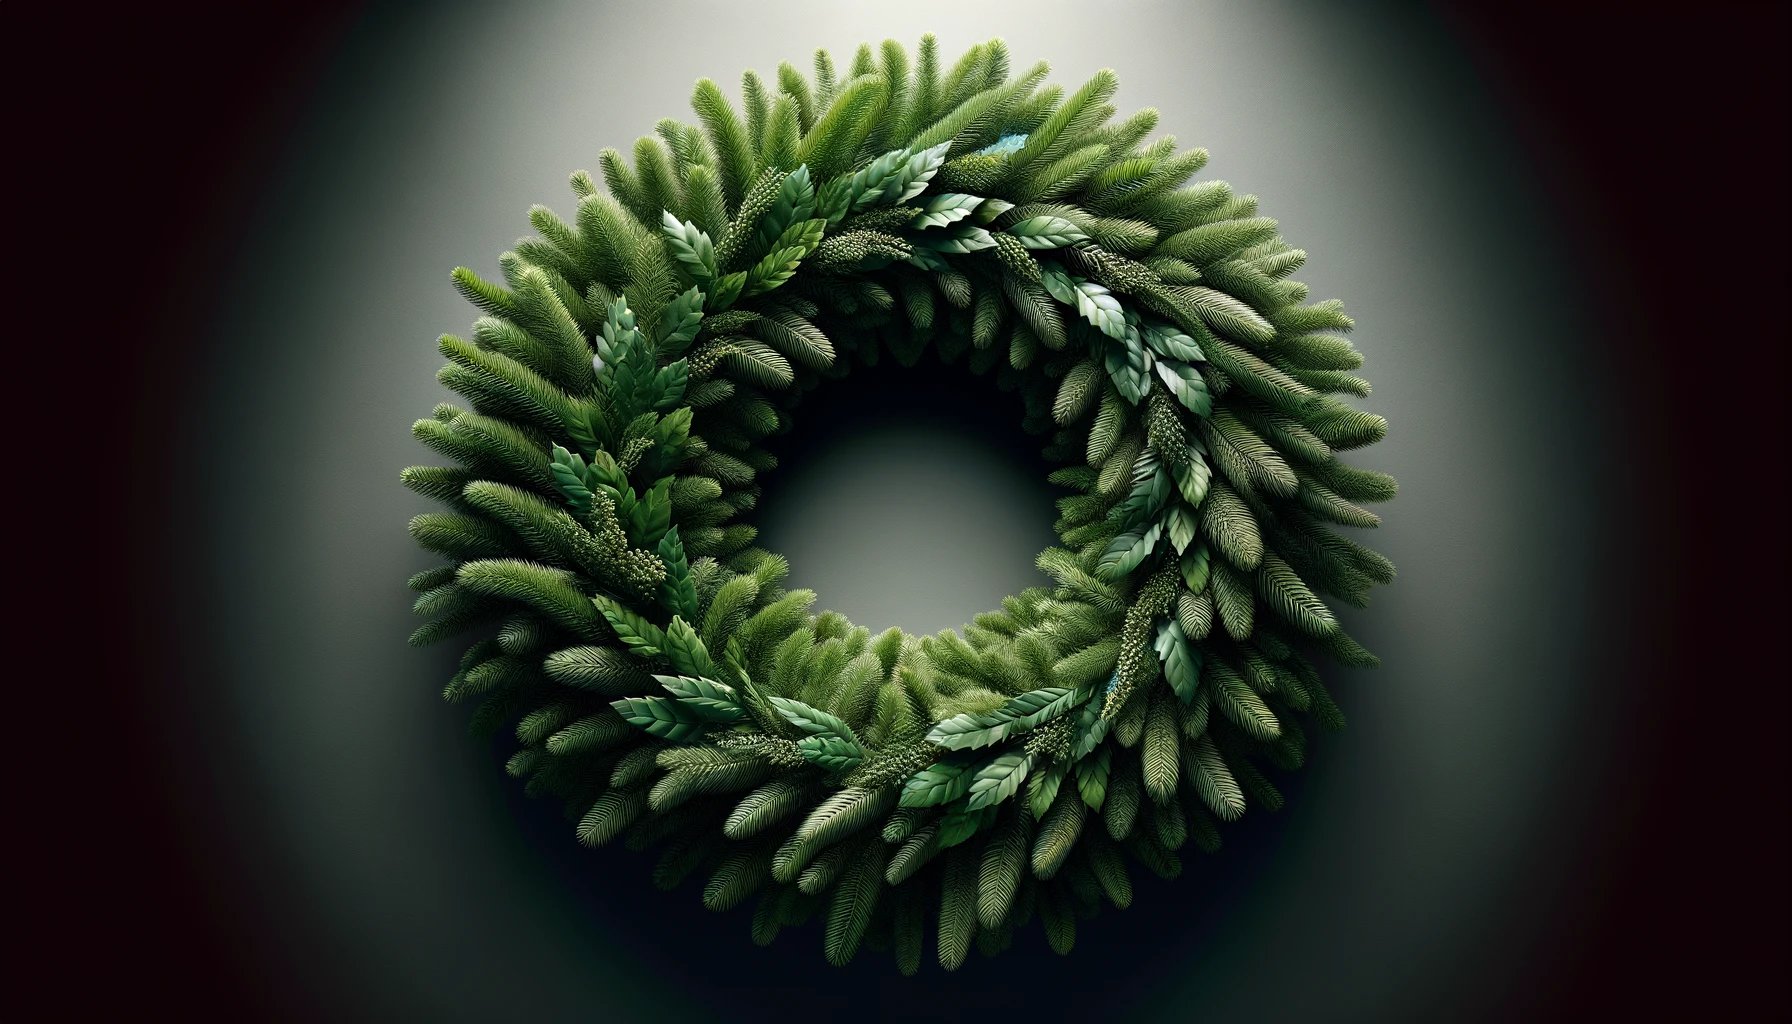 What Does The Shape Of The Advent Wreath Symbolize?